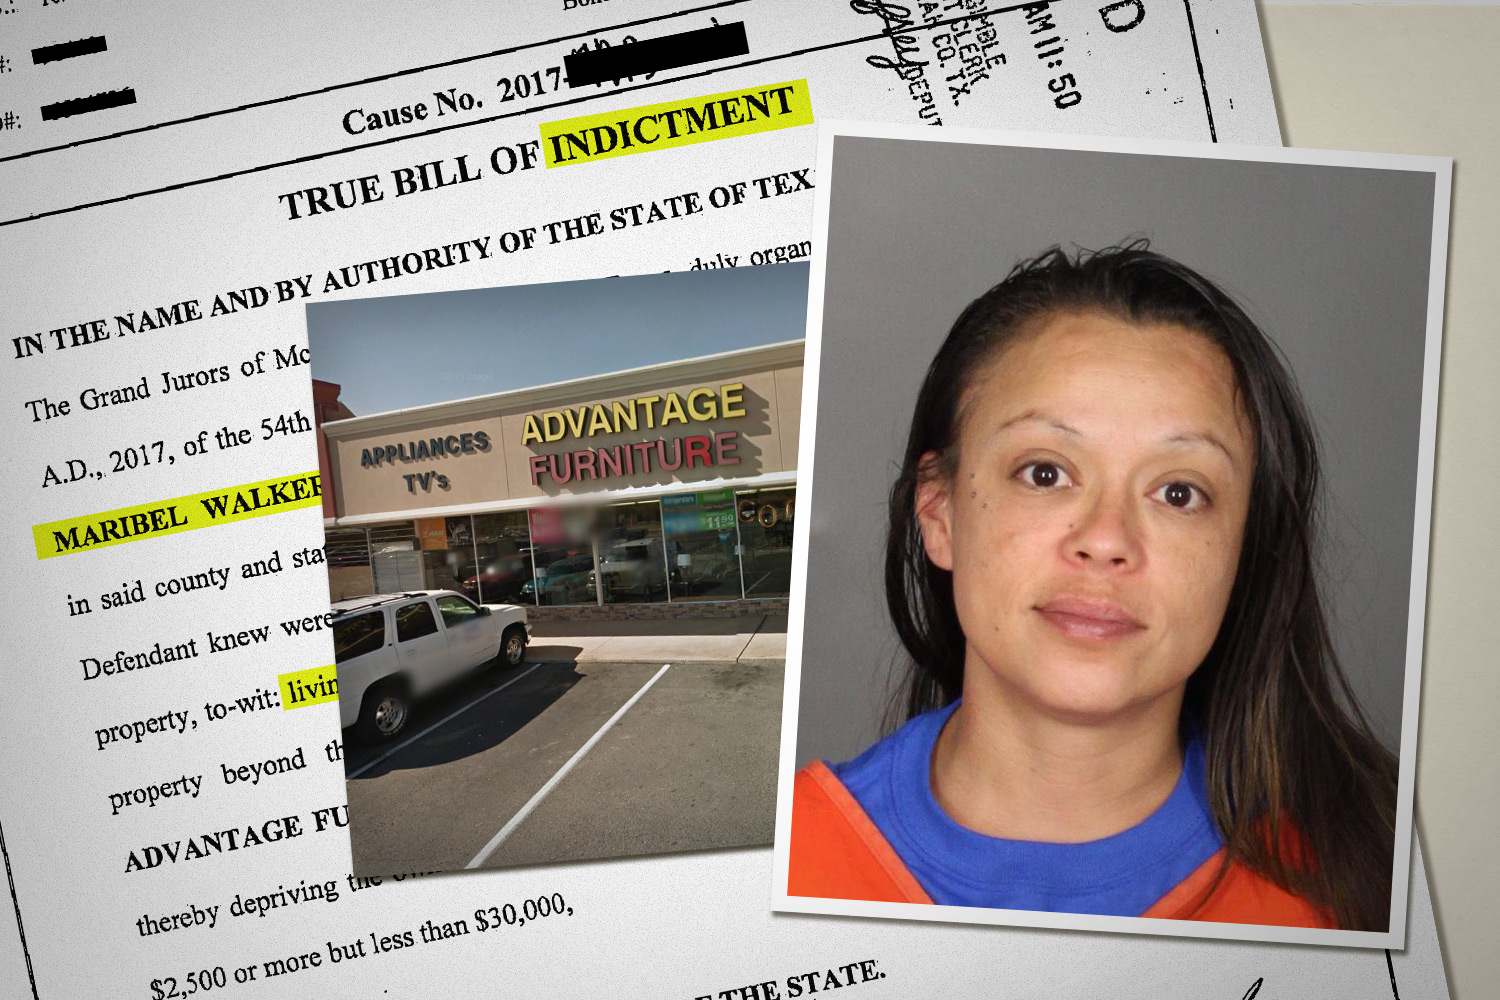 Maribel Walker rented bedroom and living room furniture in April 2015. When she forgot to make payments and failed to return the furniture for more than a year, she was arrested, jailed and now faces felony prosecution. 